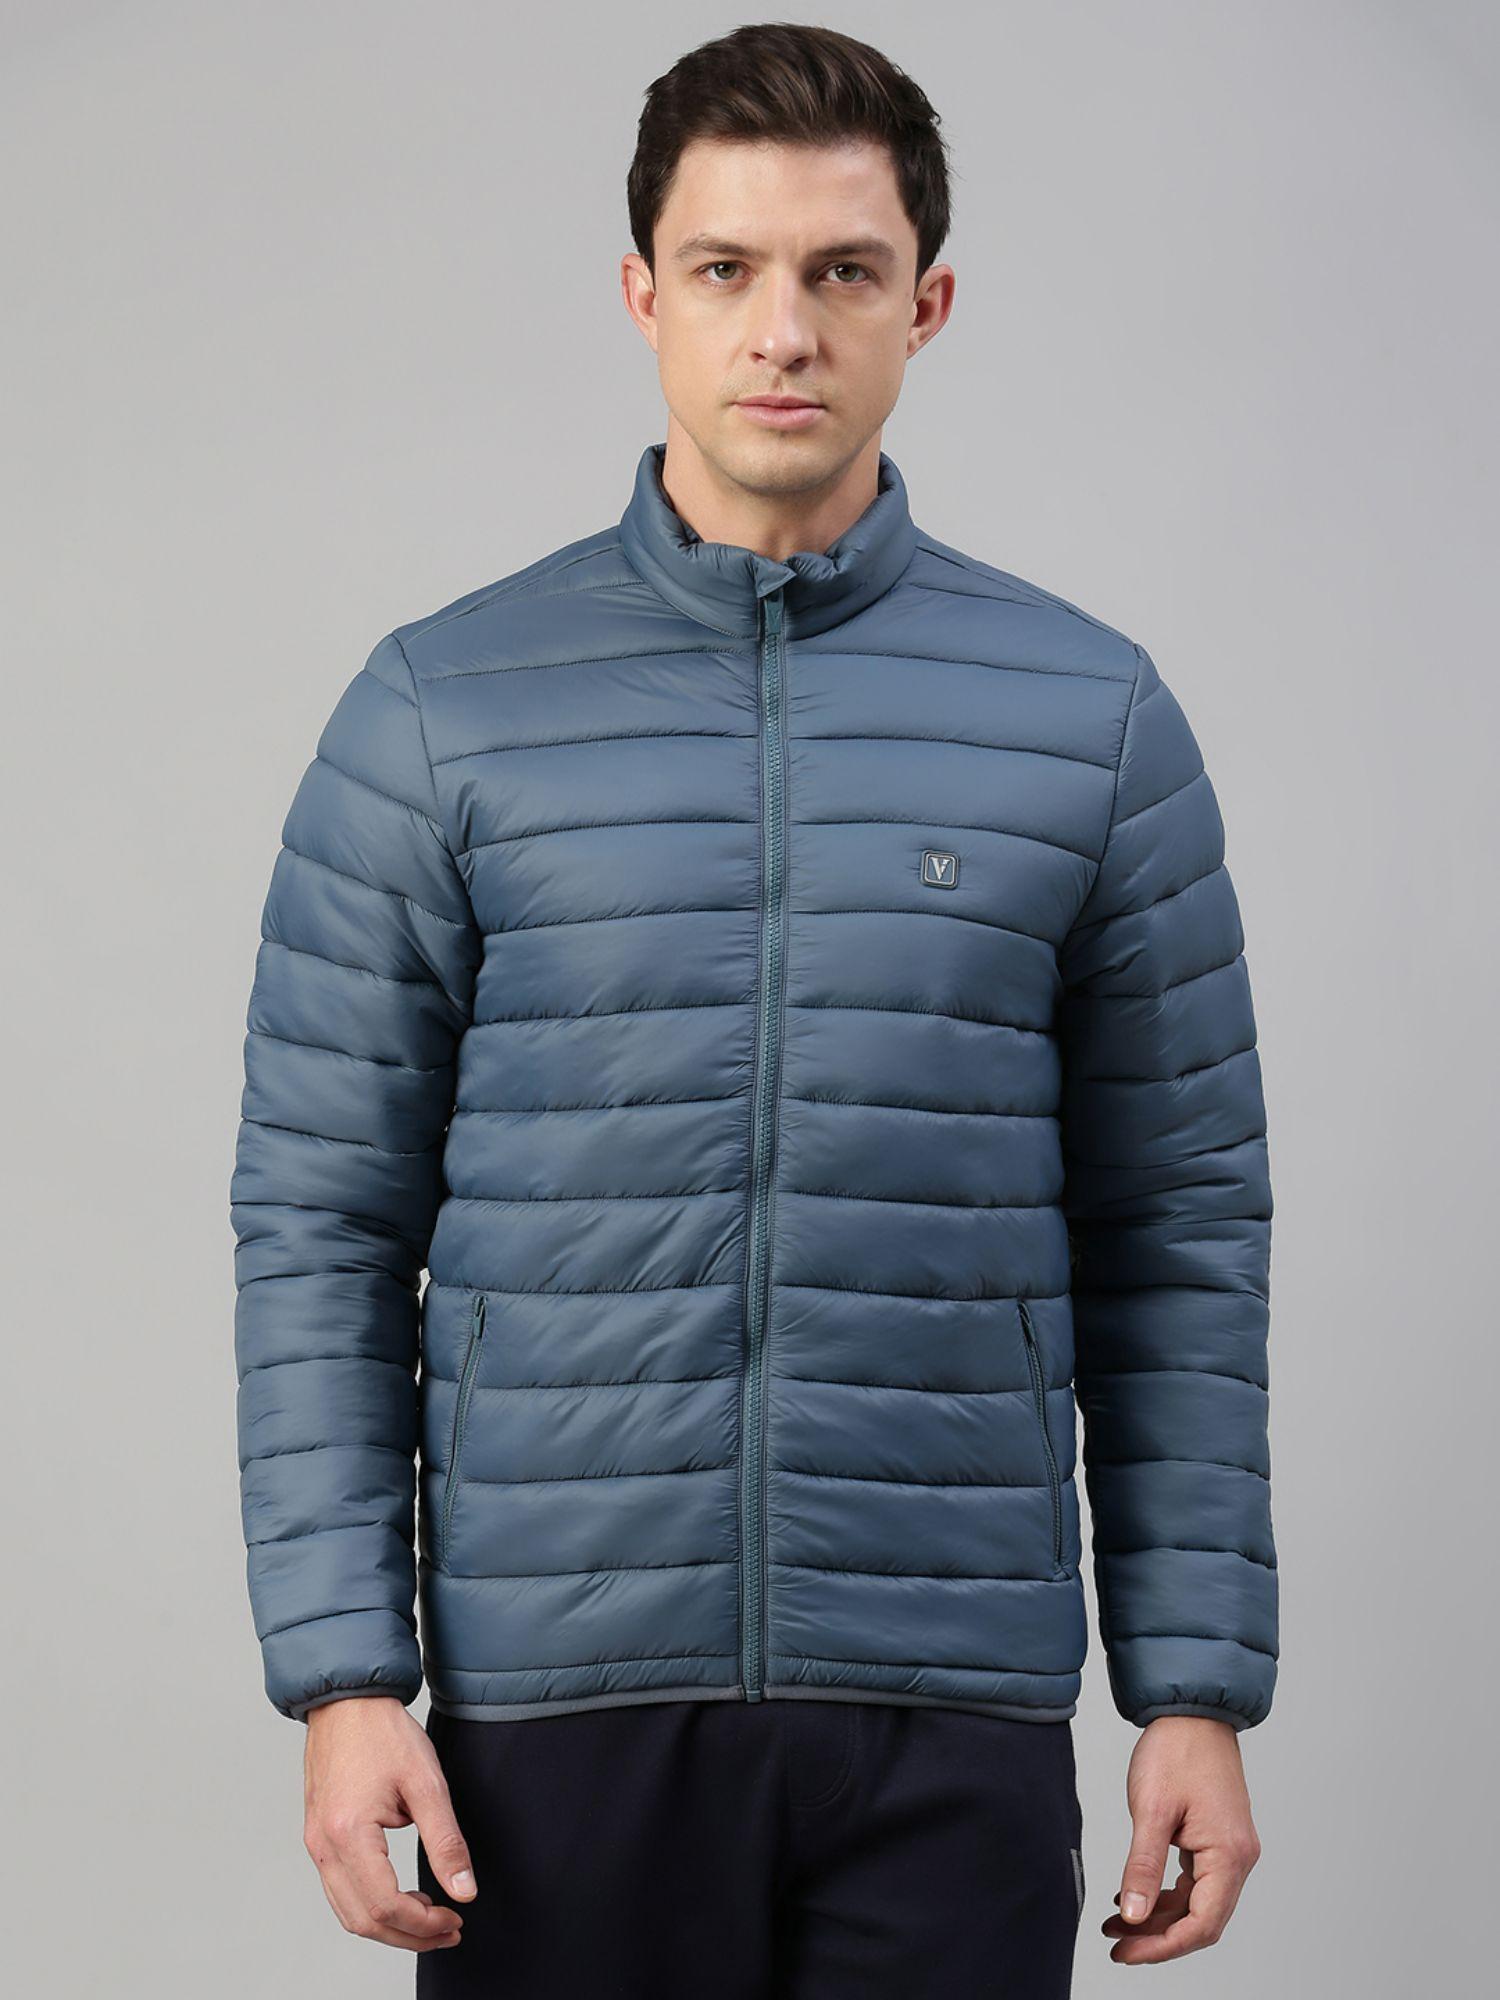 Athleisure Extra Warm and High Neck Woven Jacket - Blue Stone